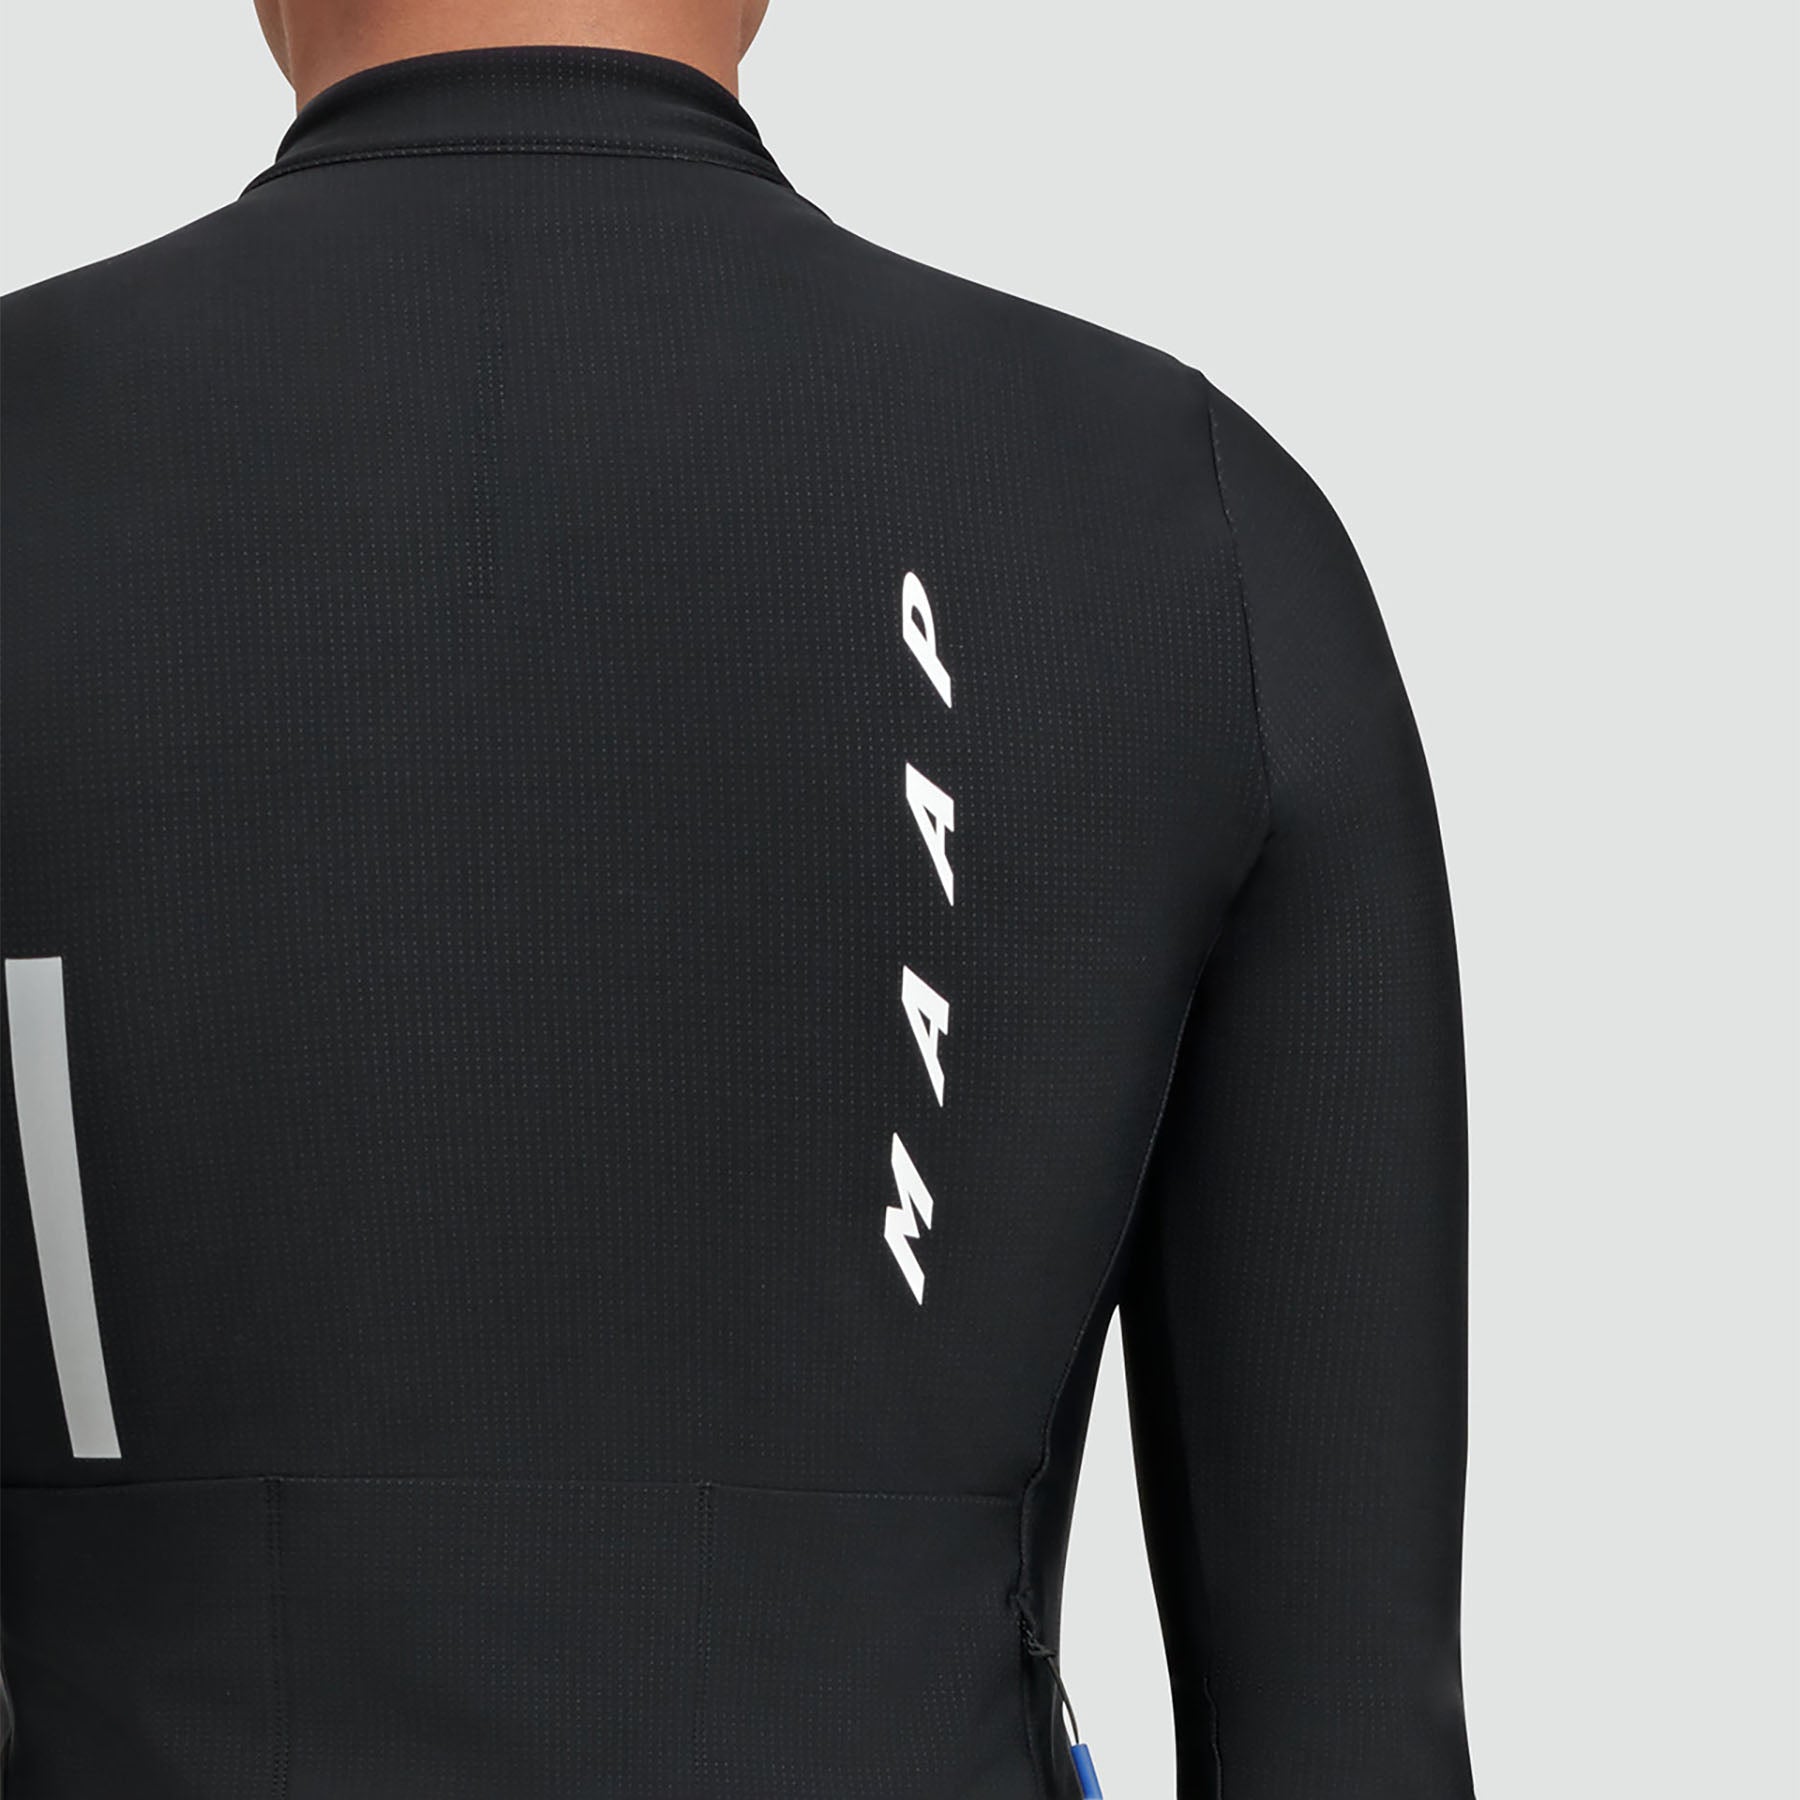 Maillot à manches longues Evade Thermal 2.0 - Noir